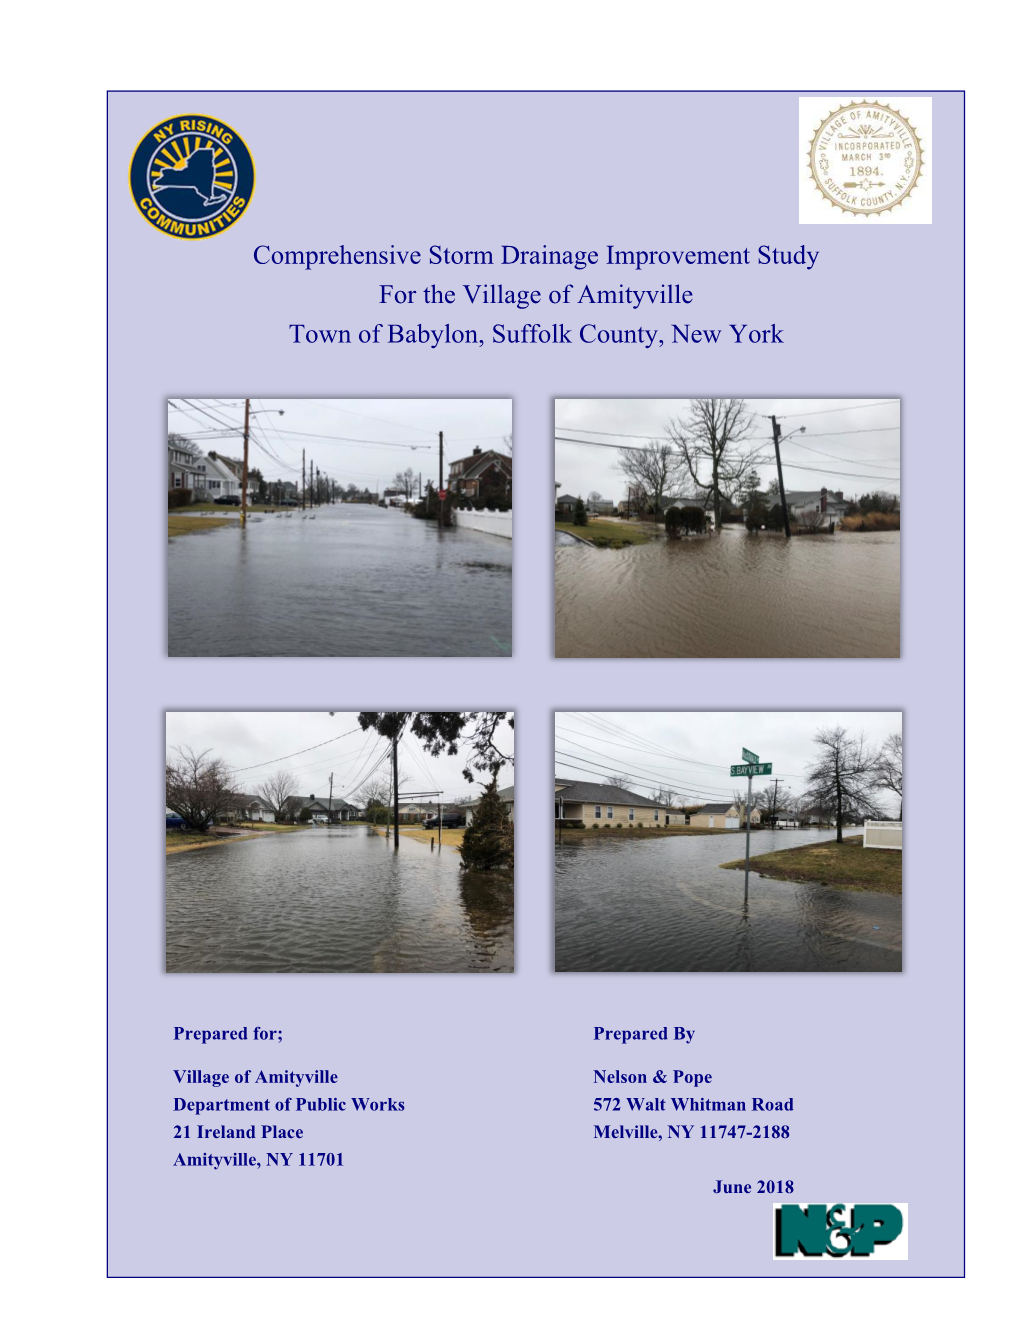 Comprehensive Storm Drainage Improvement Study for the Village of Amityville Town of Babylon, Suffolk County, New York